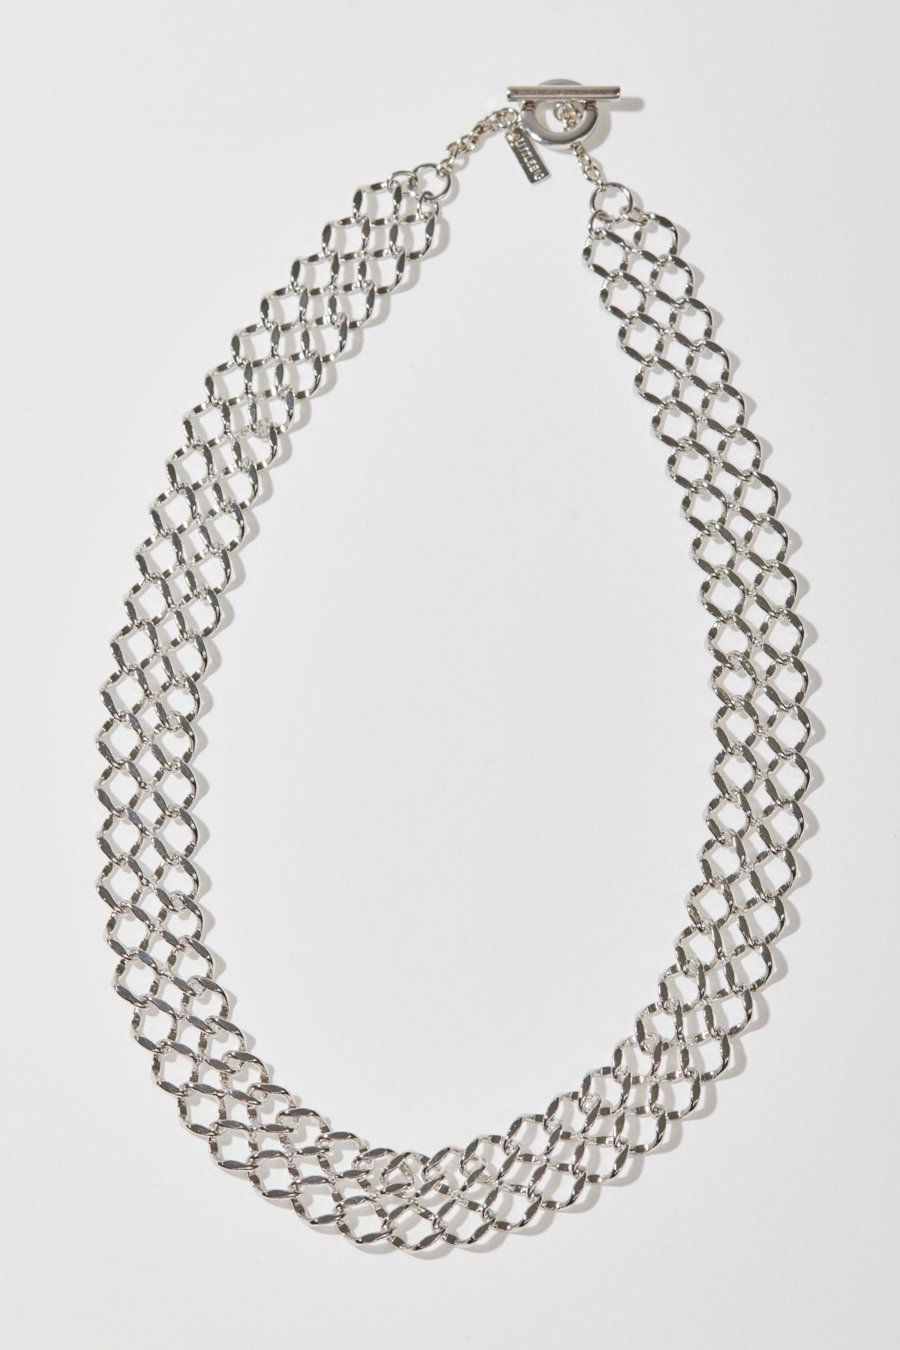 LITTLEBIG  Duo Chain Necklace<img class='new_mark_img2' src='https://img.shop-pro.jp/img/new/icons15.gif' style='border:none;display:inline;margin:0px;padding:0px;width:auto;' />